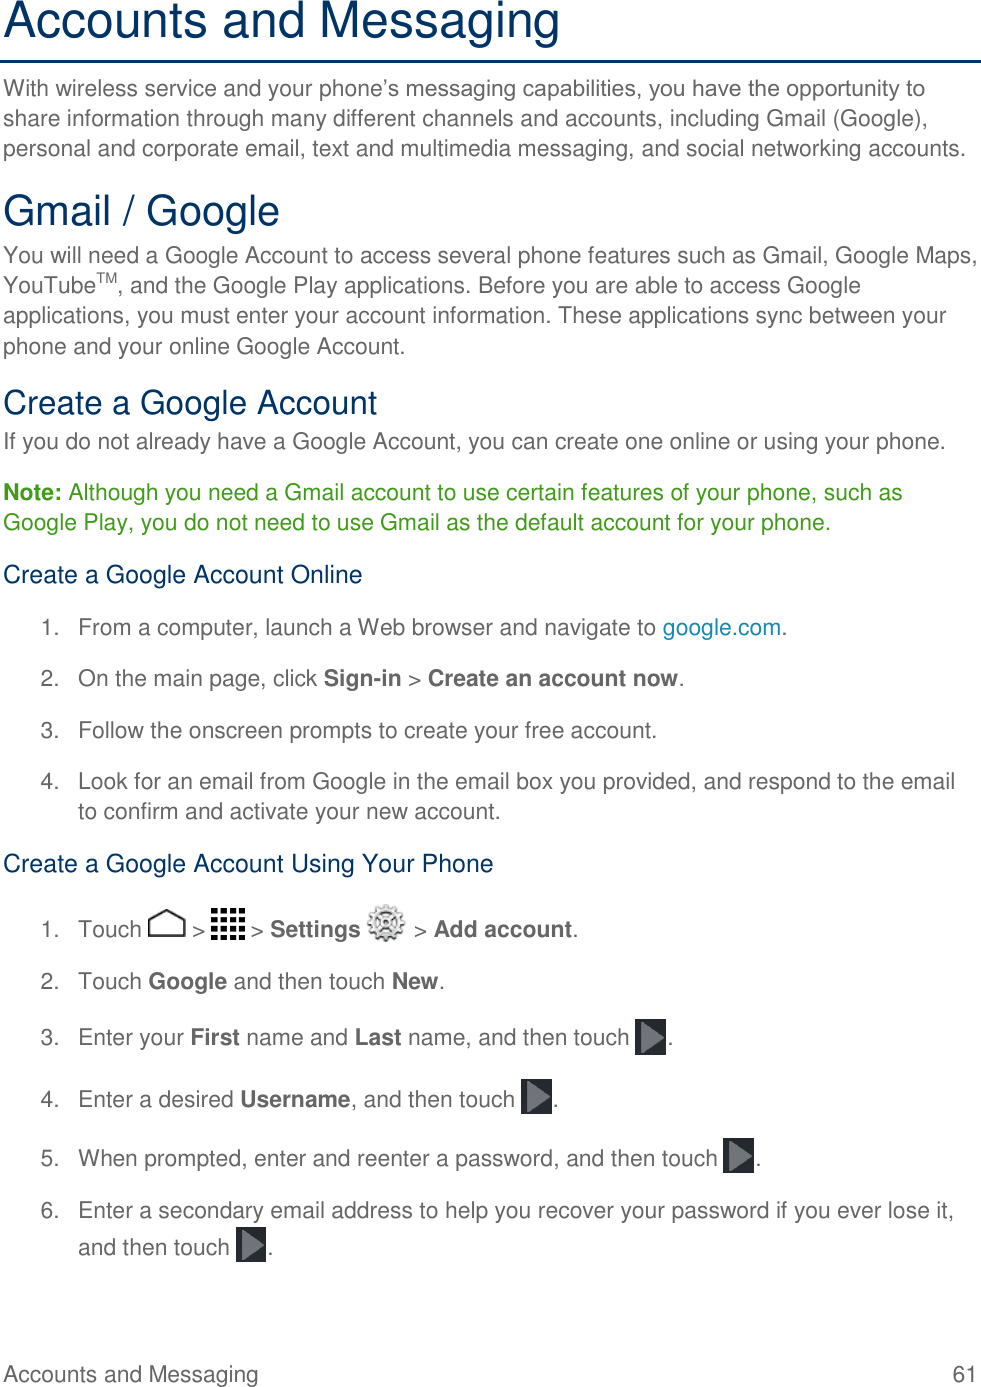 Accounts and Messaging    61 Accounts and Messaging With wireless service and your phone’s messaging capabilities, you have the opportunity to share information through many different channels and accounts, including Gmail (Google), personal and corporate email, text and multimedia messaging, and social networking accounts. Gmail / Google You will need a Google Account to access several phone features such as Gmail, Google Maps, YouTubeTM, and the Google Play applications. Before you are able to access Google applications, you must enter your account information. These applications sync between your phone and your online Google Account. Create a Google Account If you do not already have a Google Account, you can create one online or using your phone. Note: Although you need a Gmail account to use certain features of your phone, such as Google Play, you do not need to use Gmail as the default account for your phone. Create a Google Account Online 1.  From a computer, launch a Web browser and navigate to google.com. 2.  On the main page, click Sign-in &gt; Create an account now. 3.  Follow the onscreen prompts to create your free account. 4.  Look for an email from Google in the email box you provided, and respond to the email to confirm and activate your new account. Create a Google Account Using Your Phone 1.  Touch   &gt;   &gt; Settings   &gt; Add account. 2.  Touch Google and then touch New.  3.  Enter your First name and Last name, and then touch  . 4.  Enter a desired Username, and then touch  .  5.  When prompted, enter and reenter a password, and then touch  . 6.  Enter a secondary email address to help you recover your password if you ever lose it, and then touch  .  